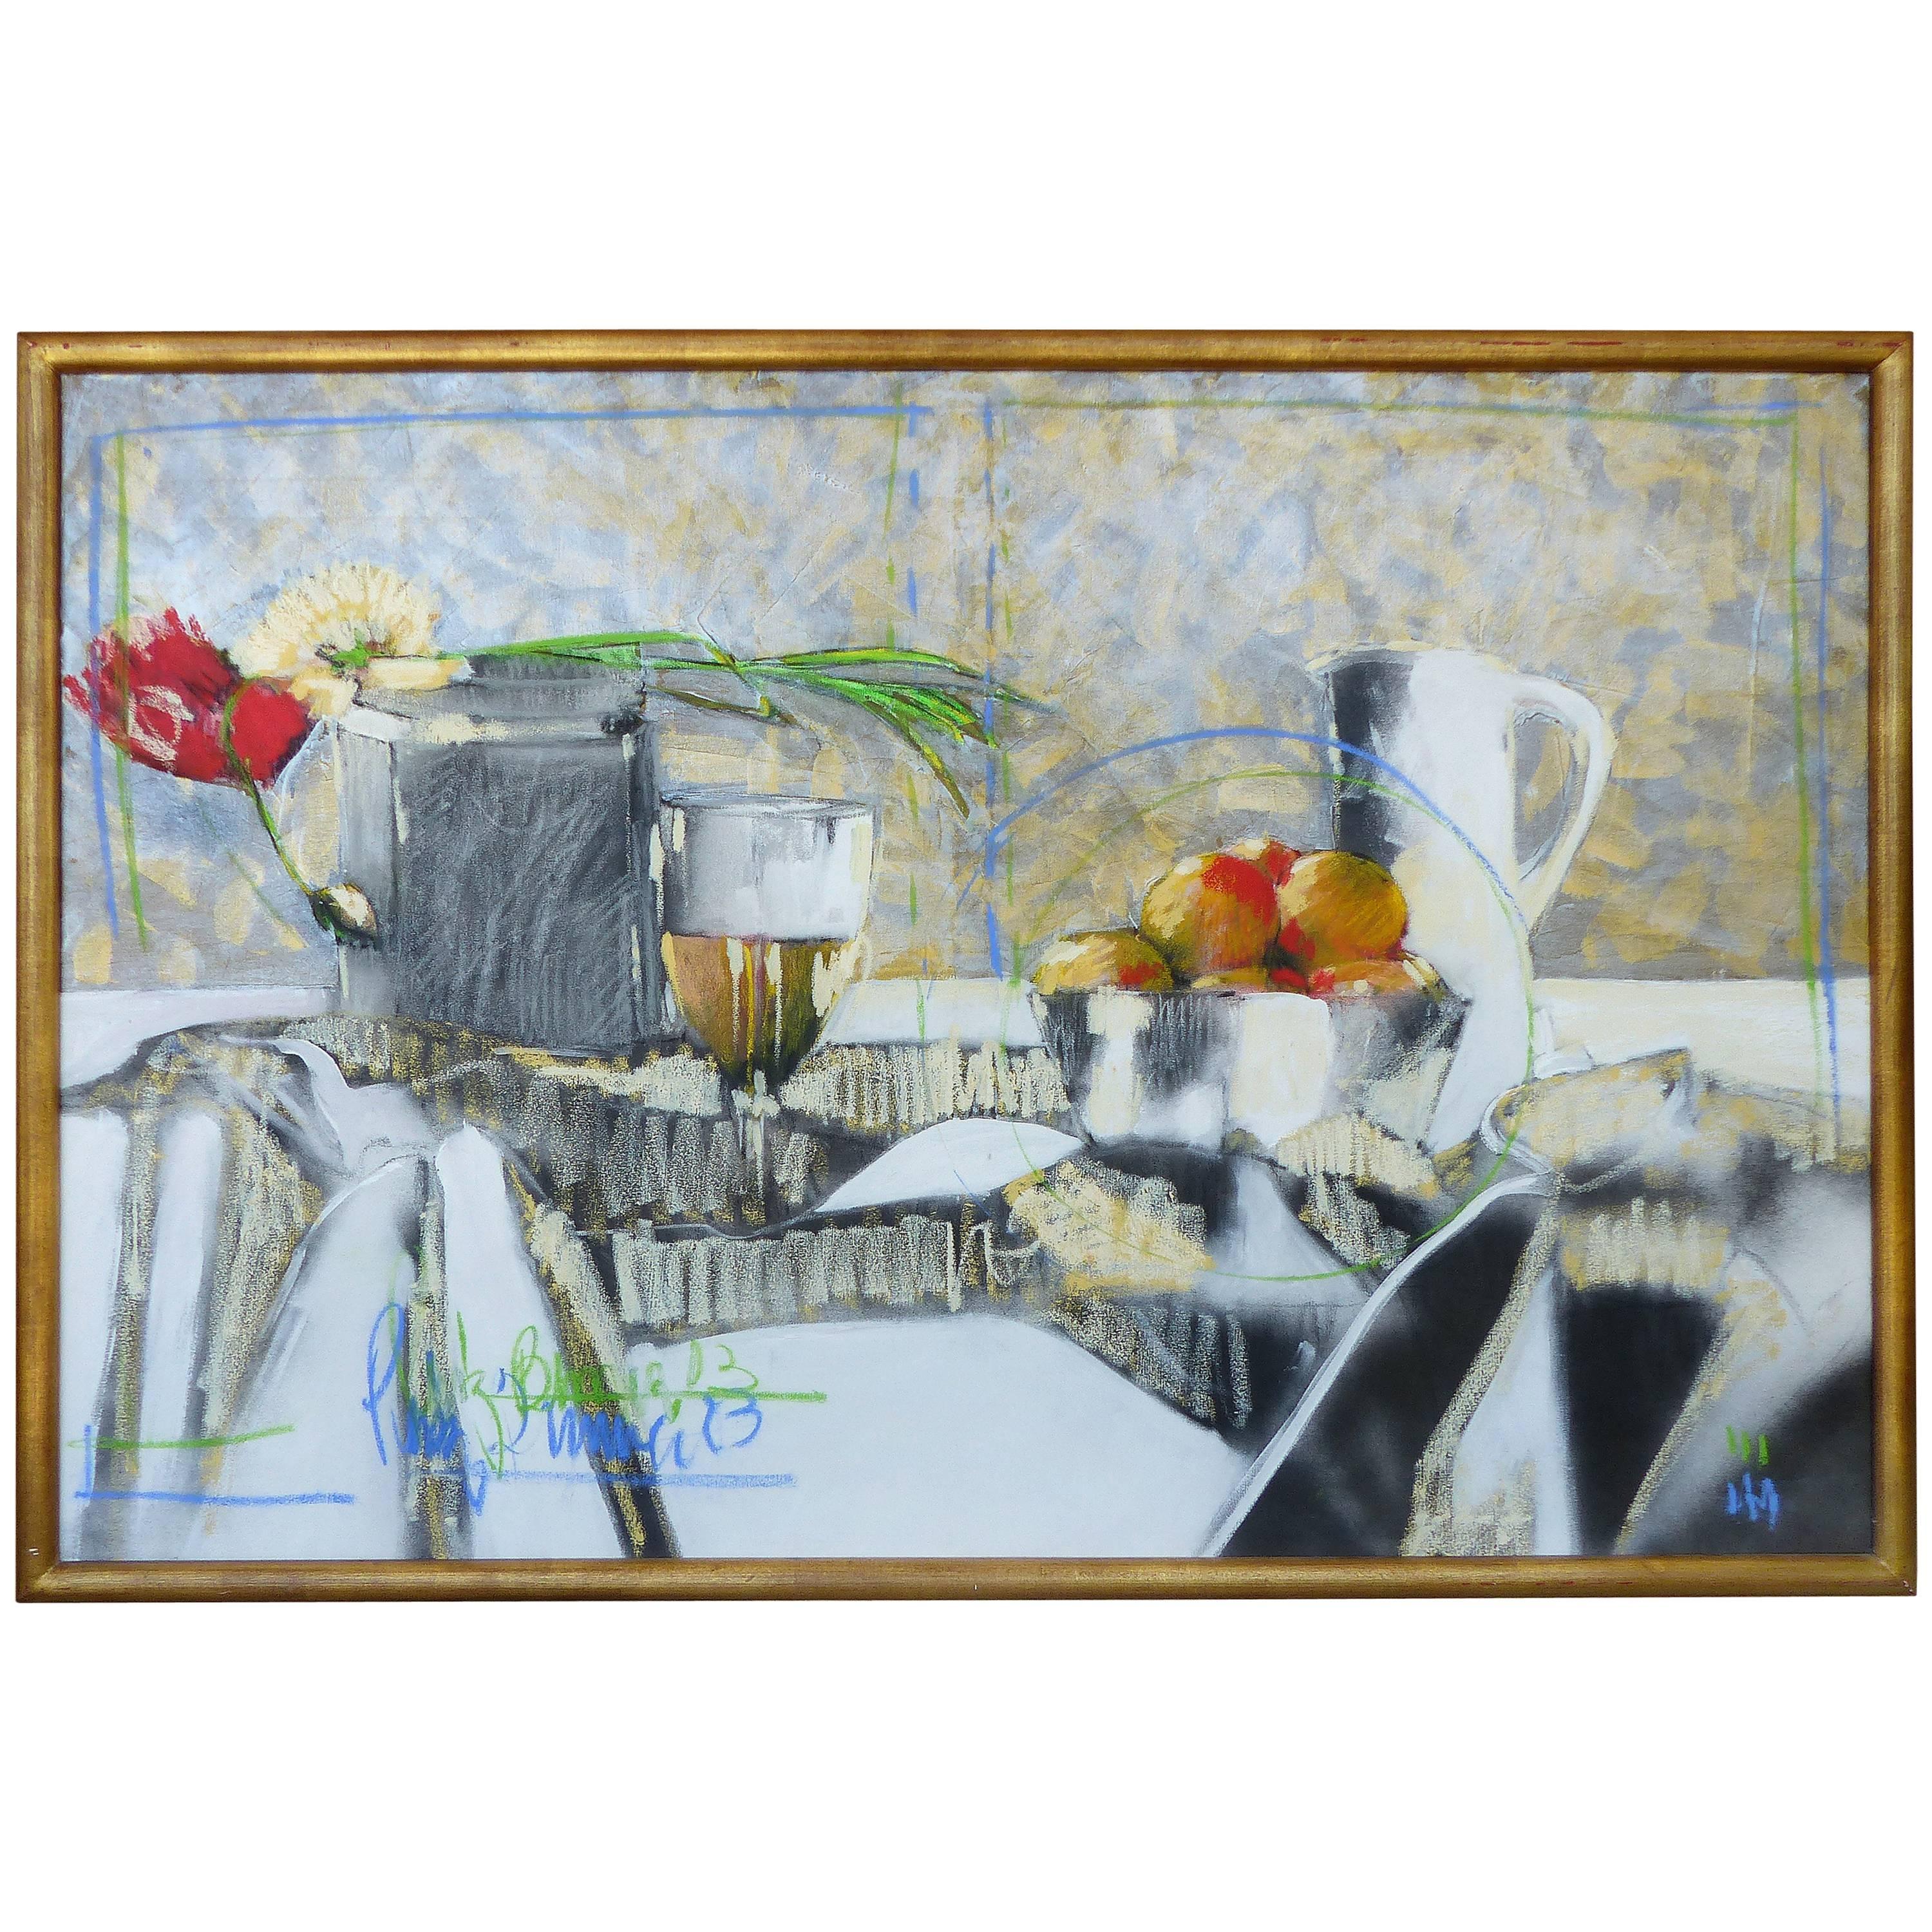 Contemporary Perez Becerra Abstract Table Still Life Oil Painting